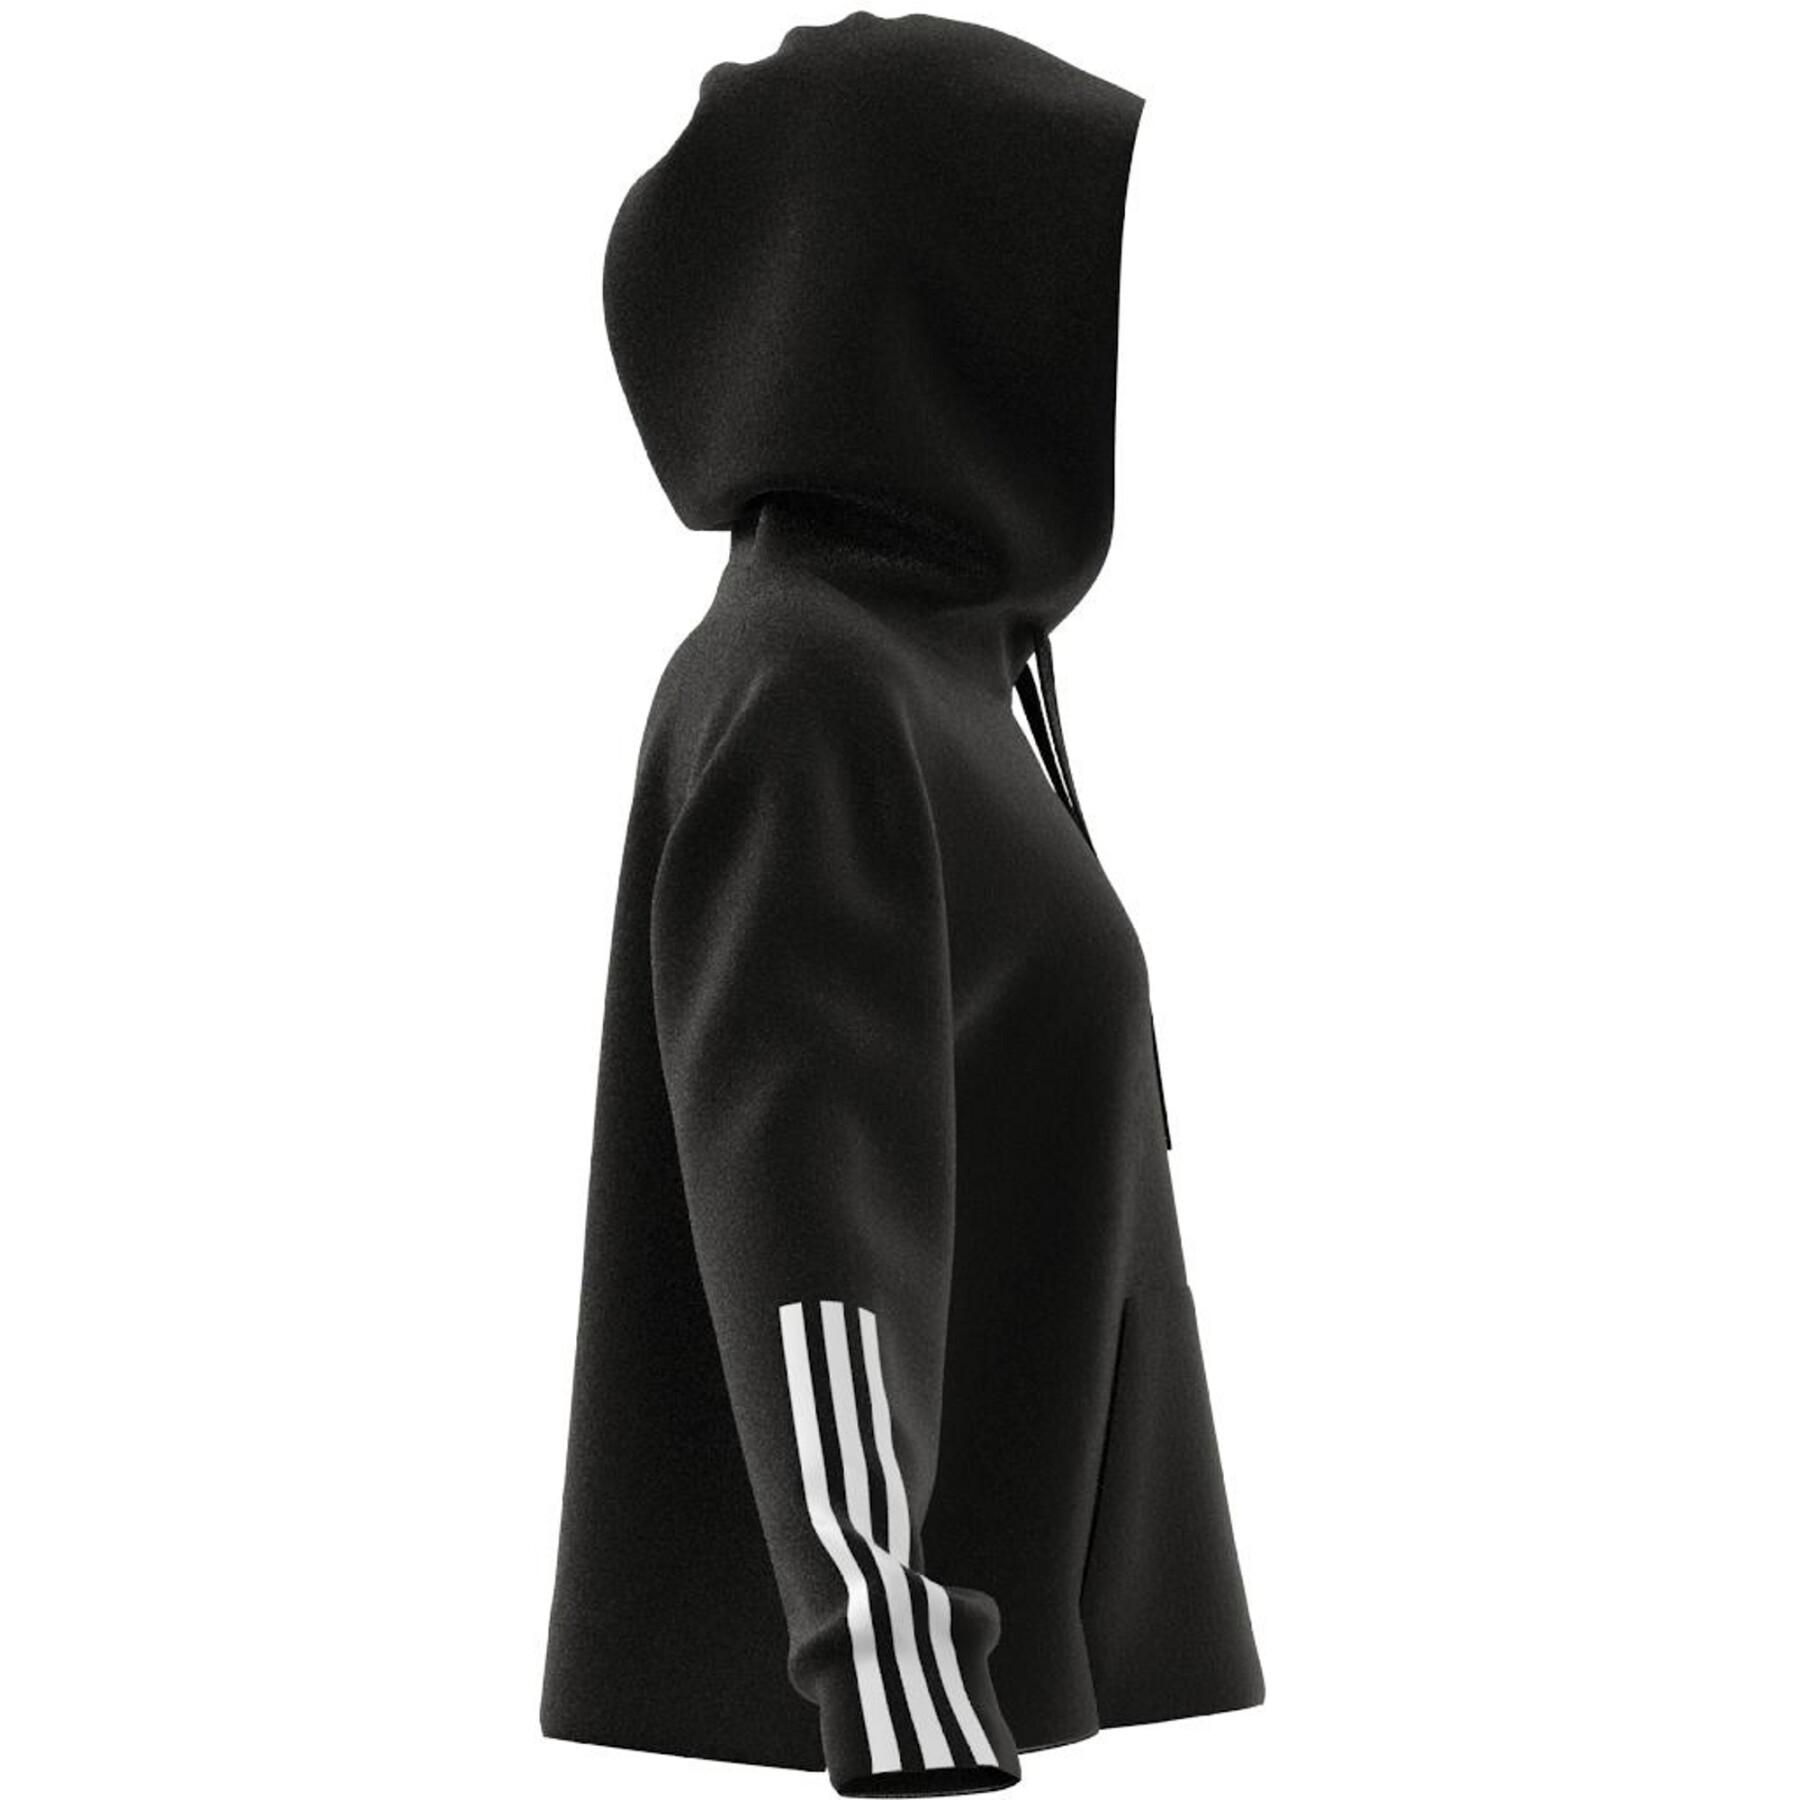 Women's hoodie adidas Essentials Relaxed 3-Stripes